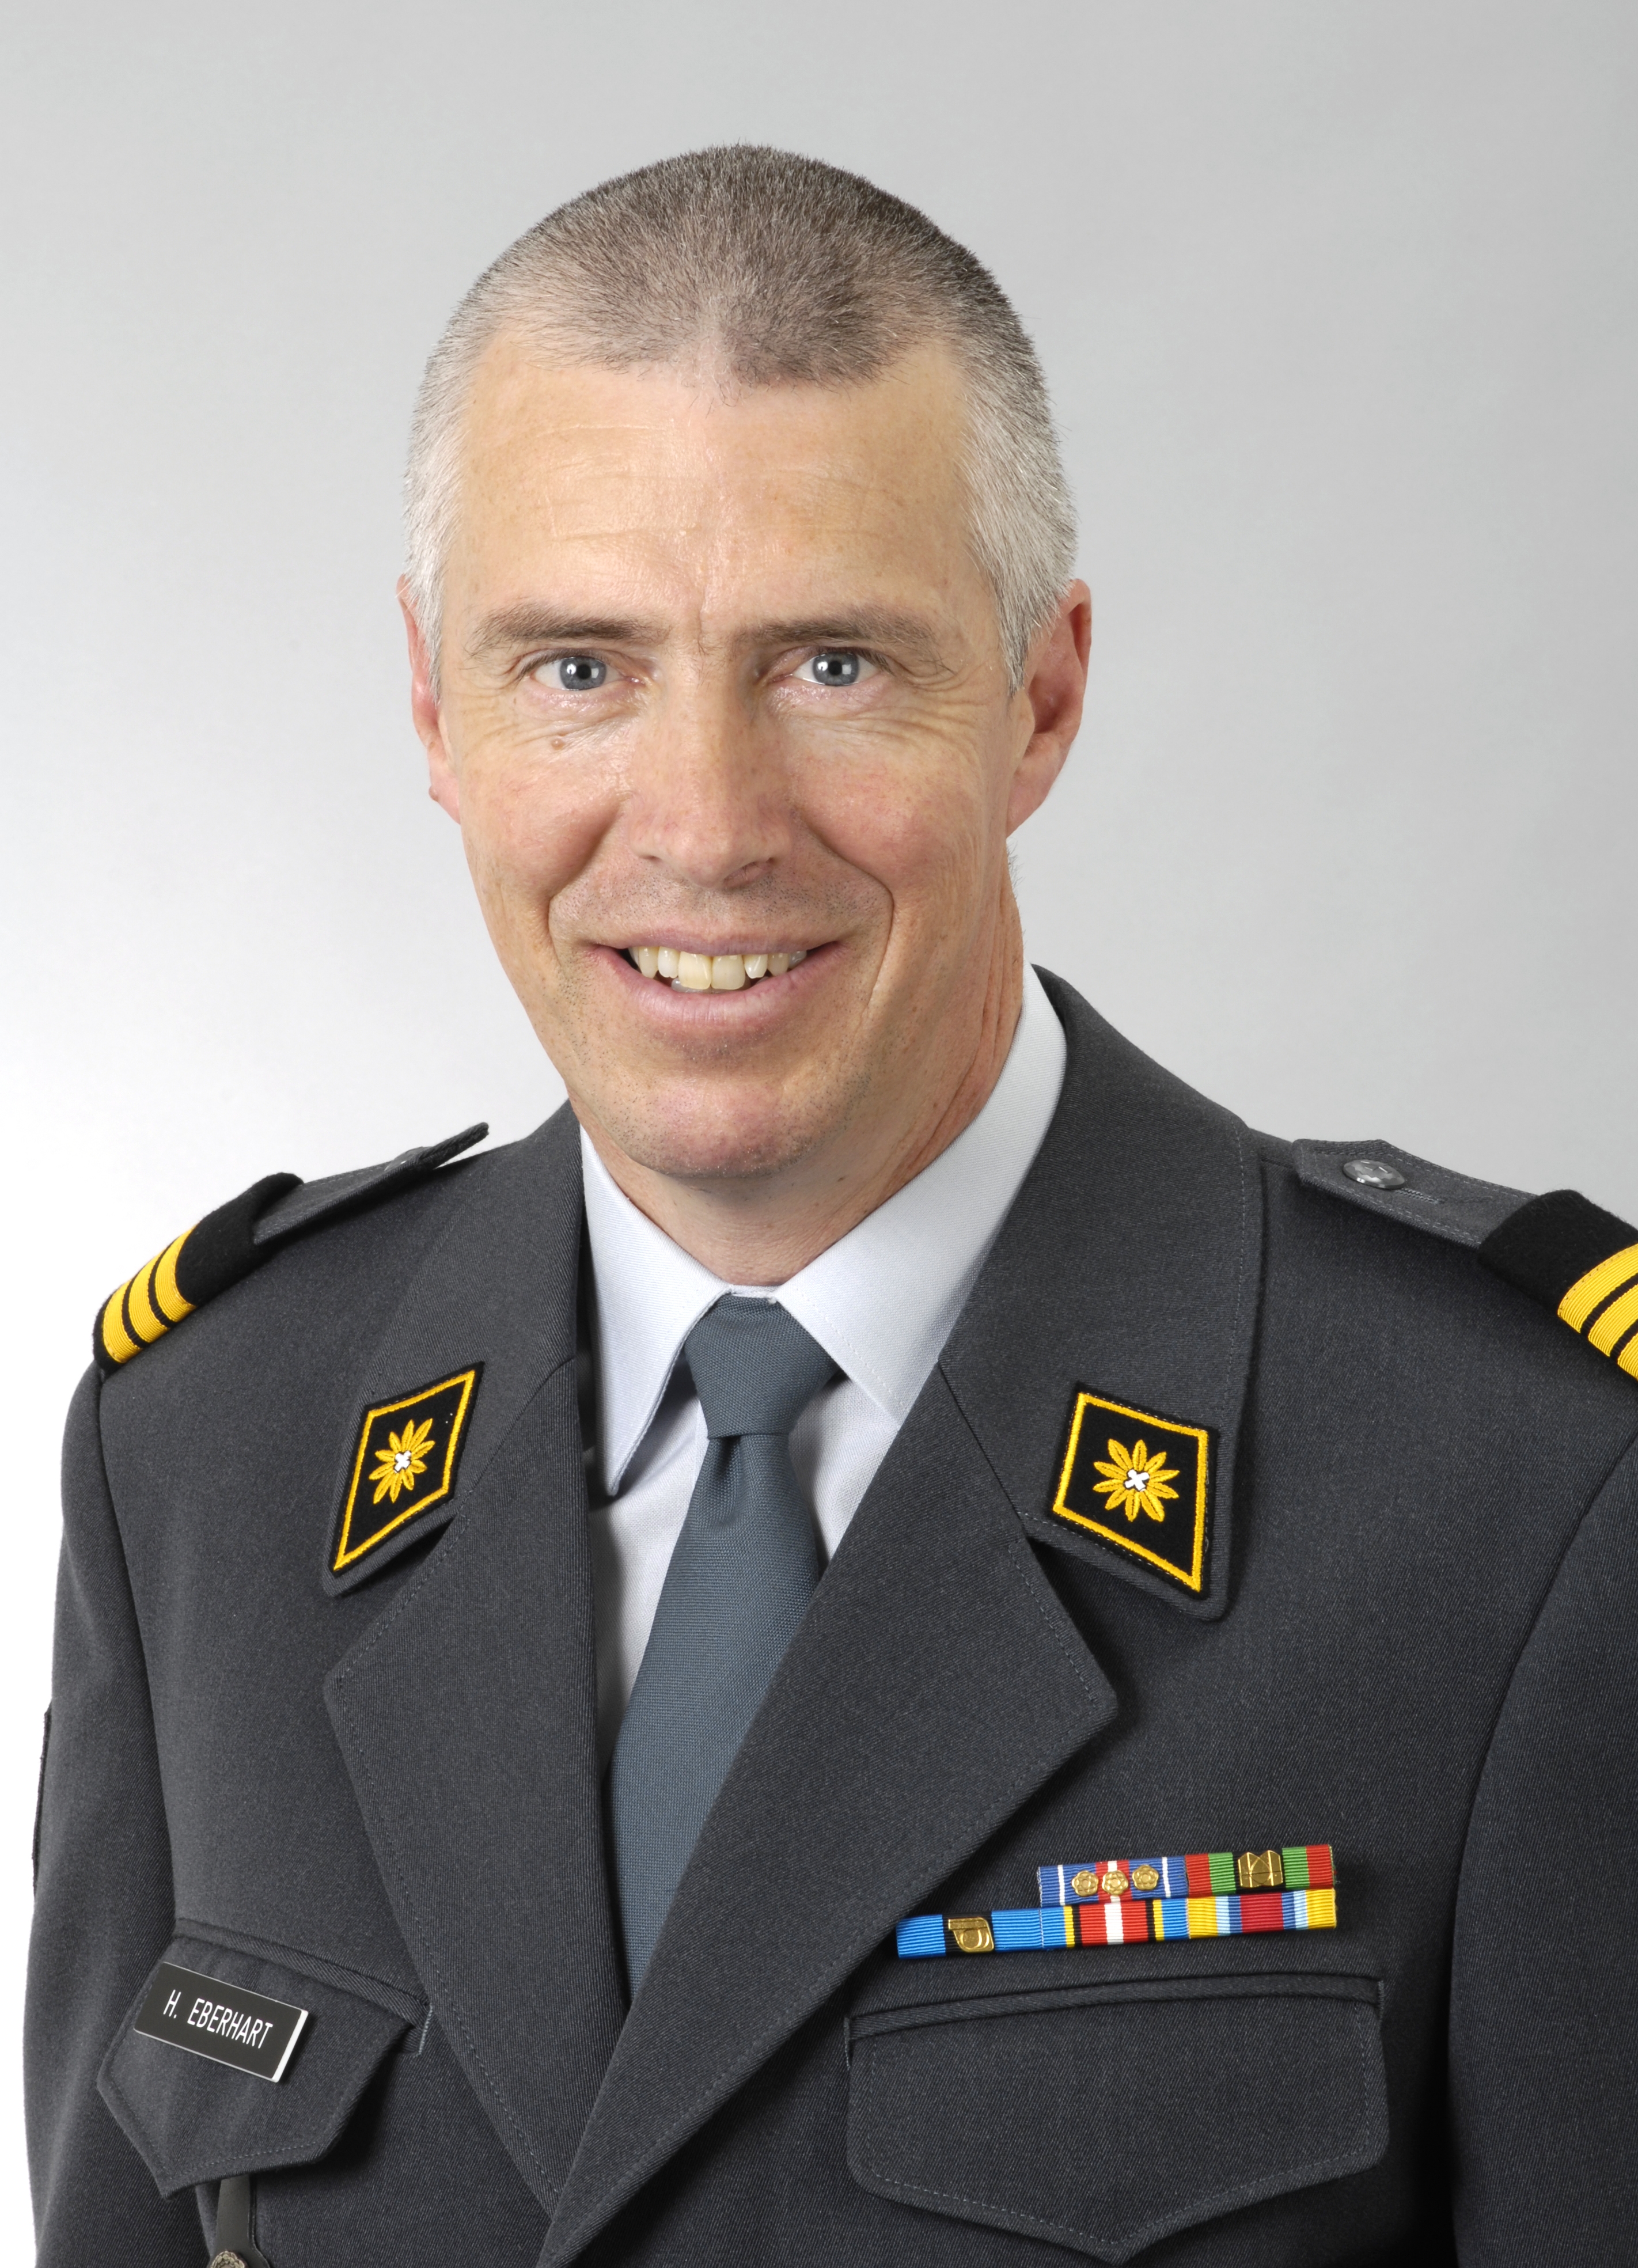 GCSP ITC-LISC Alumni: Where are they now? No. 4: Colonel (GS) Hans Eberhart